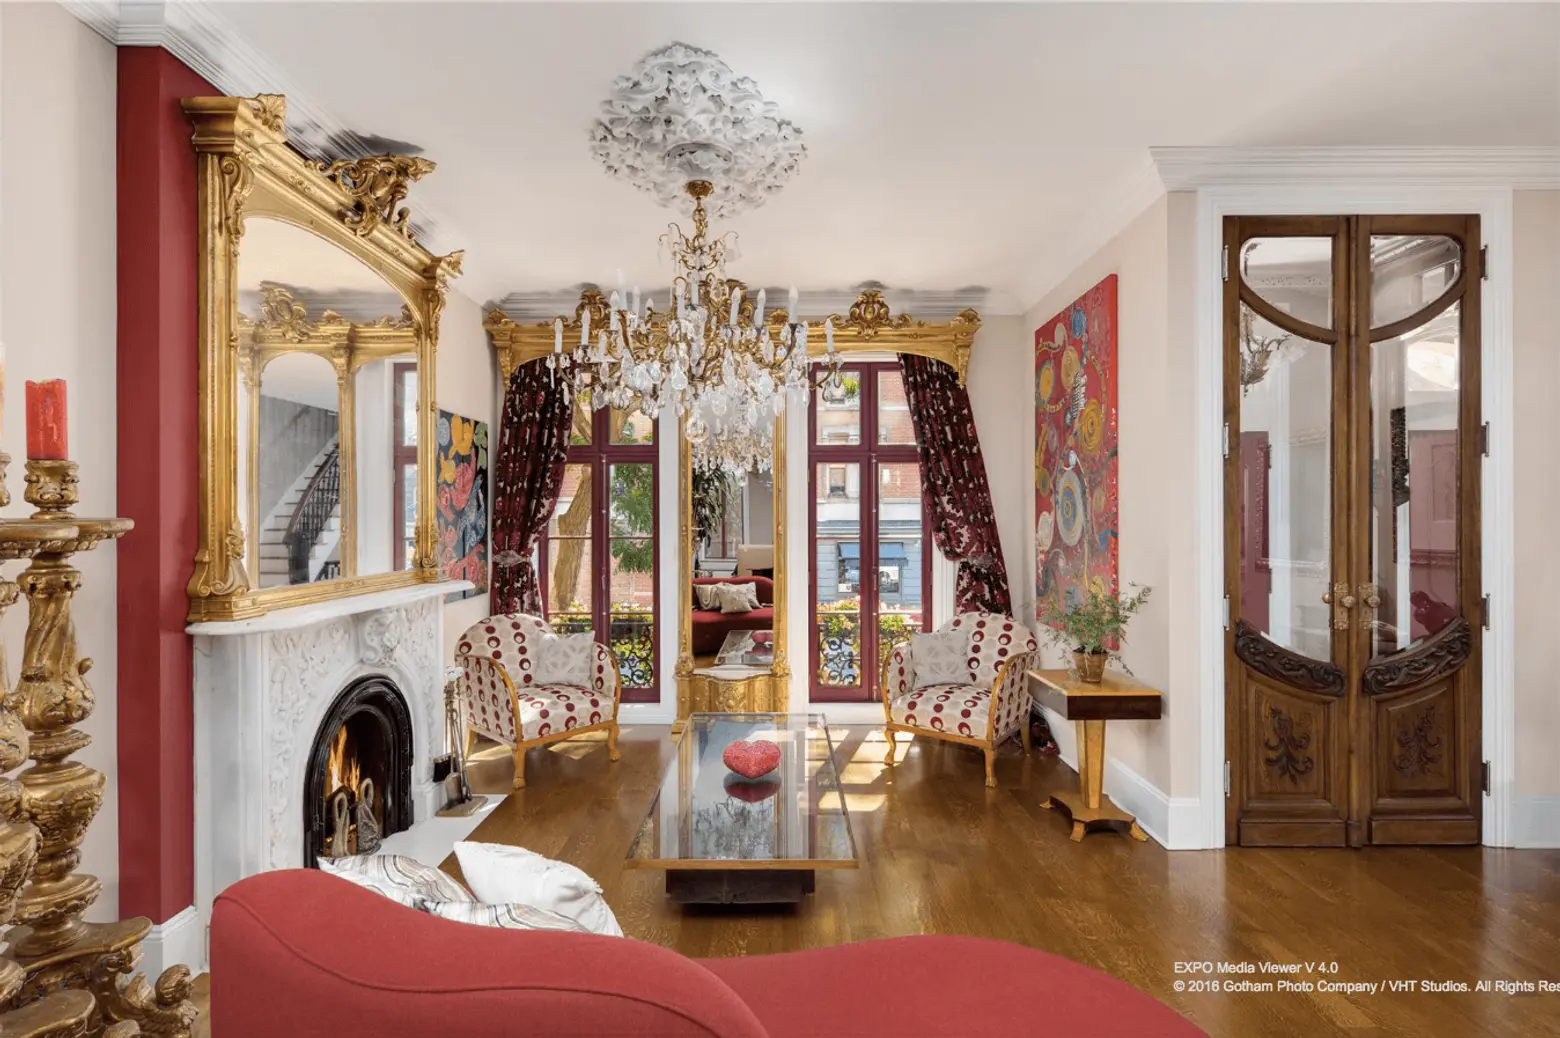 $16.75M townhouse owned by artist Angel ‘Vlady’ Oliveros boasts banisters from the Plaza Hotel